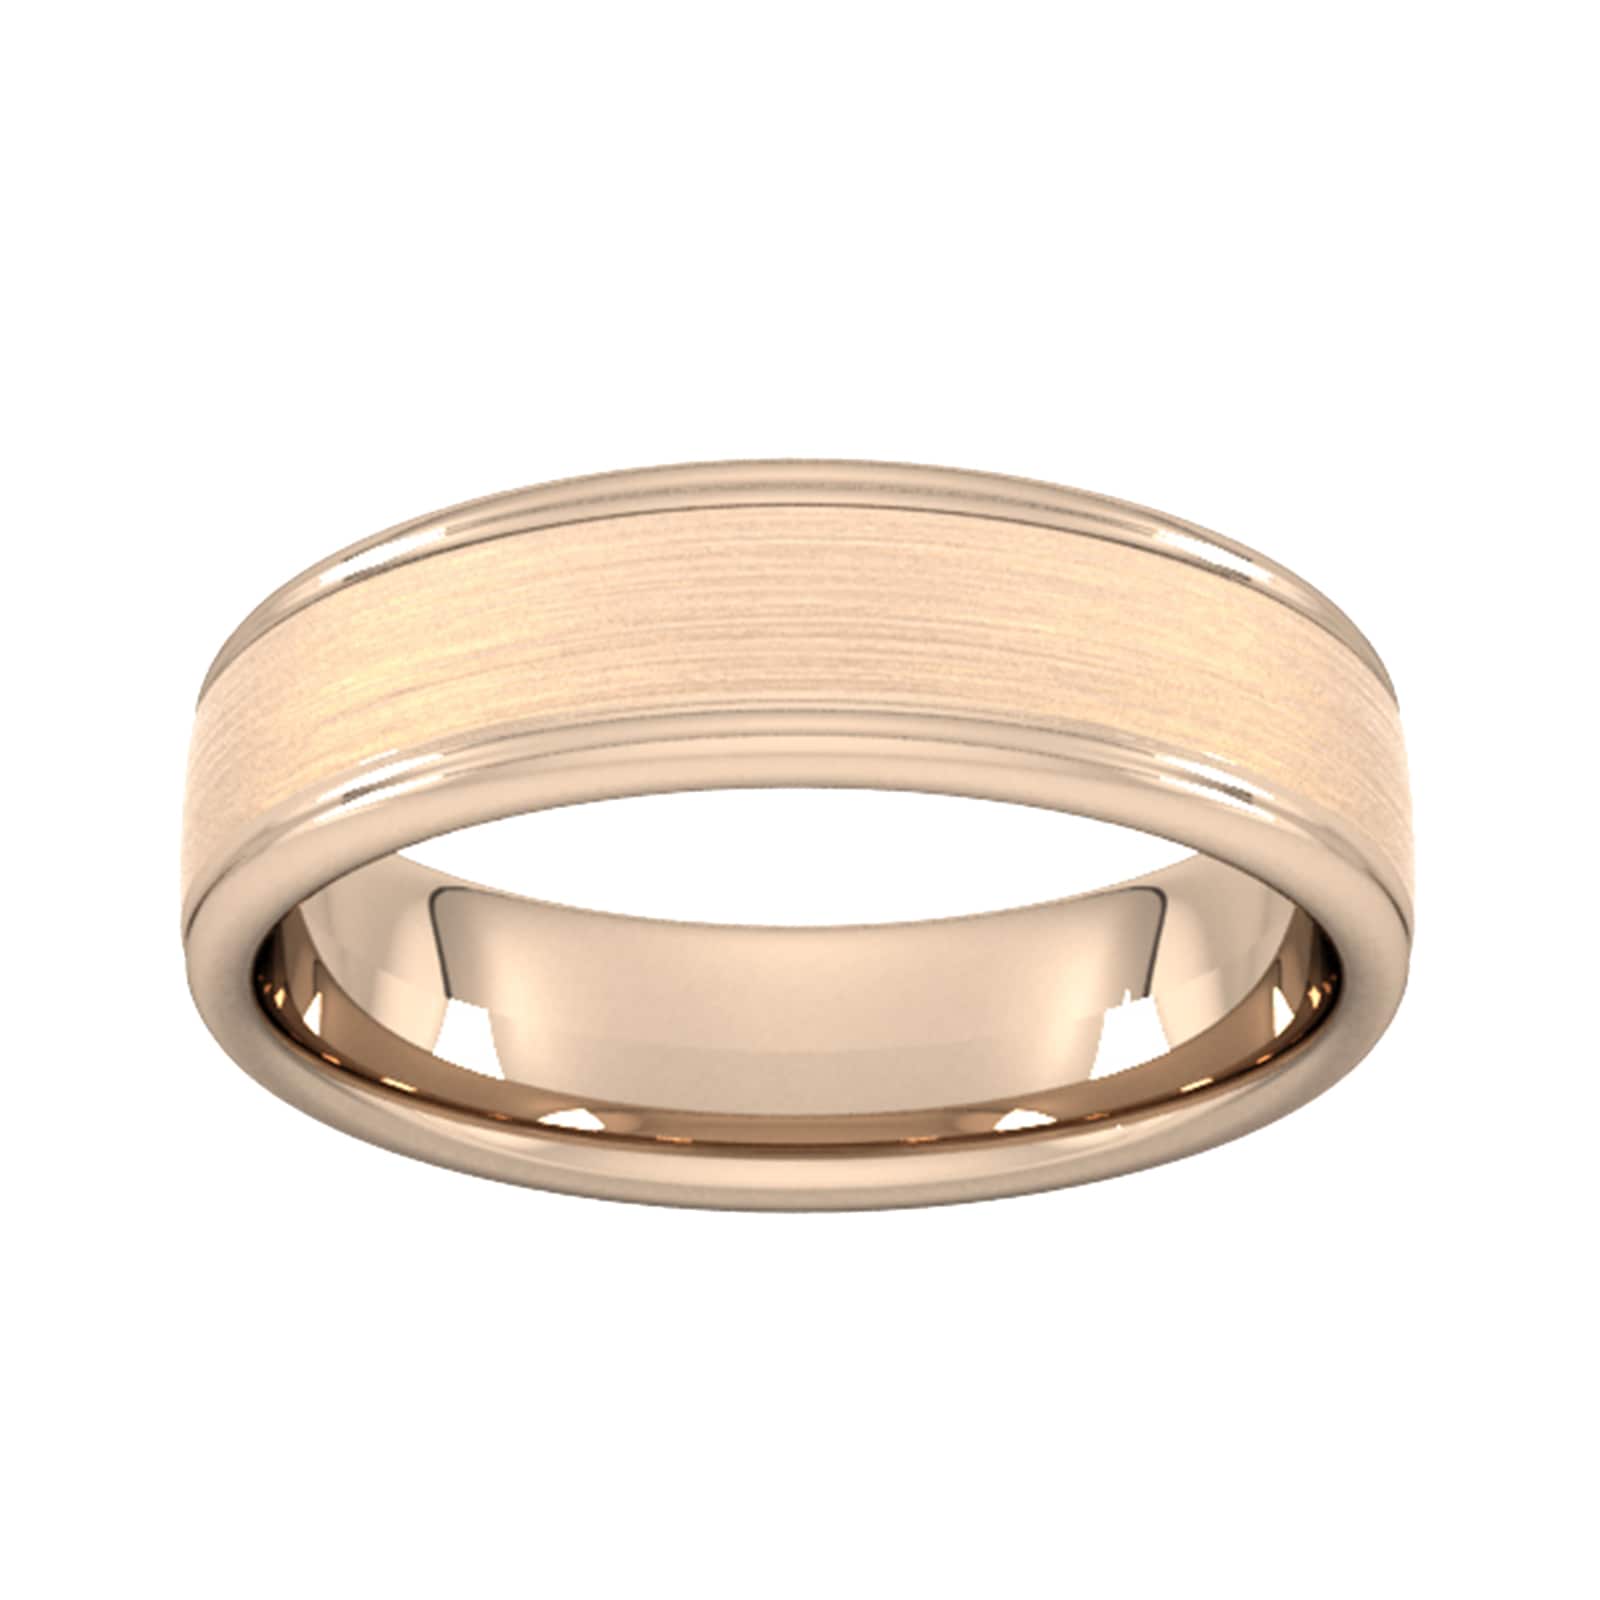 5mm Traditional Court Heavy Matt Centre With Grooves Wedding Ring In 9 Carat Rose Gold - Ring Size R